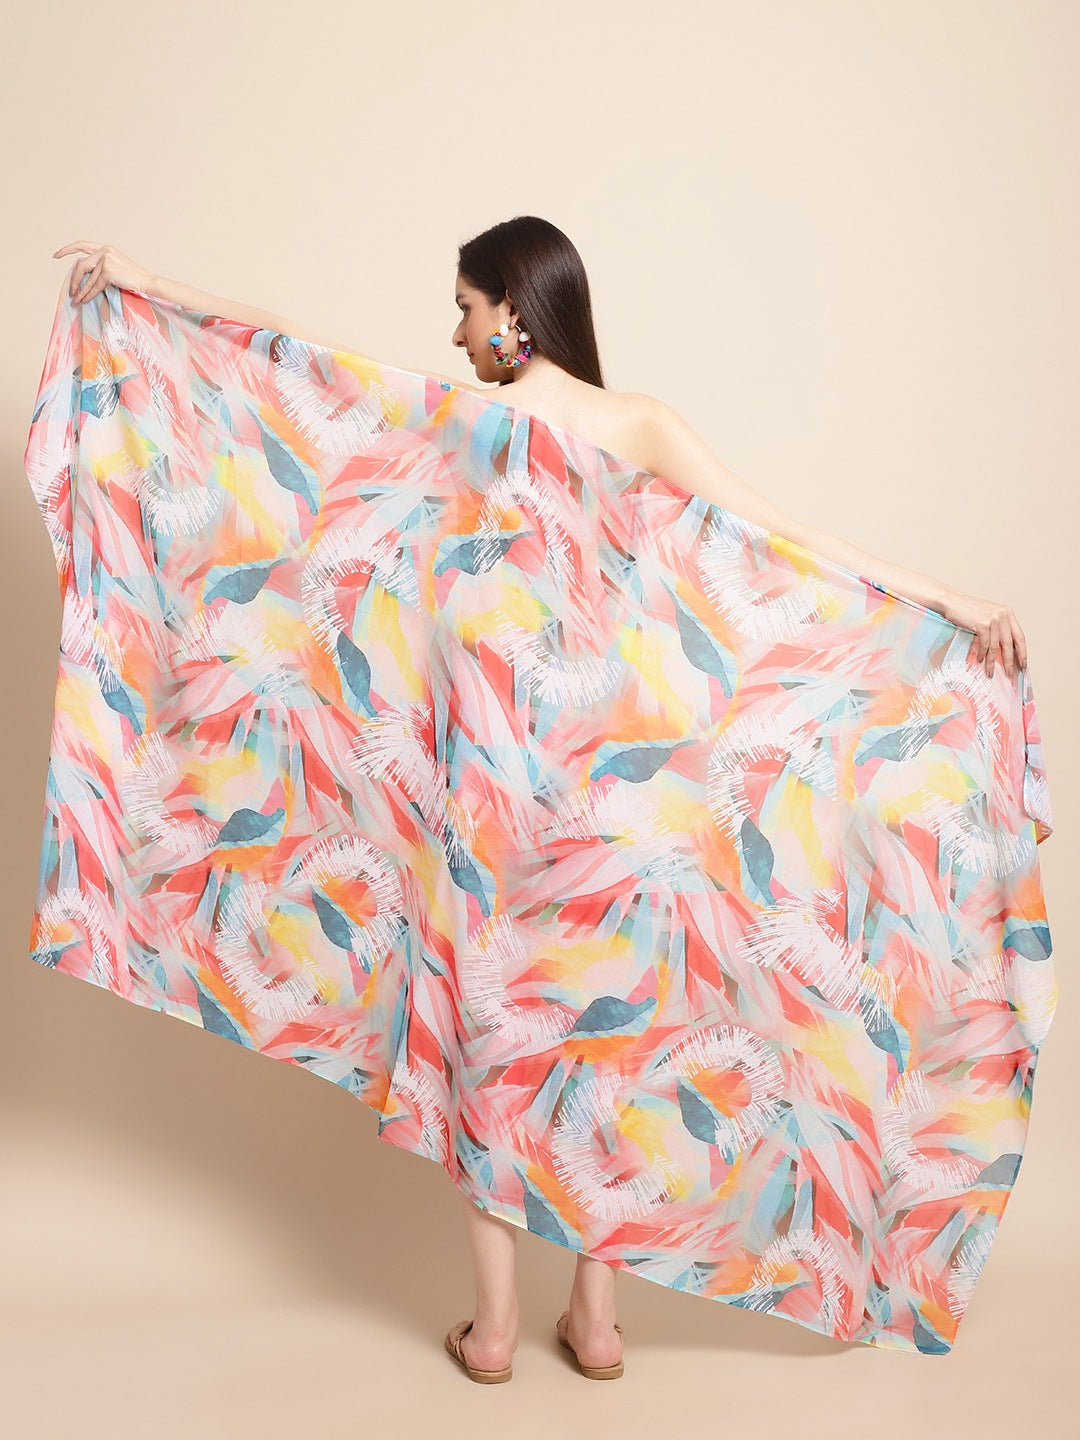 Multi Color Abstract Printed Georgette Swimwear Cover Up Sarong For Women Claura Designs Pvt. Ltd. Sarong Beachwear, Cover-up, Coverup, Free Size, georgette, multi color, Sarong, Swimwear